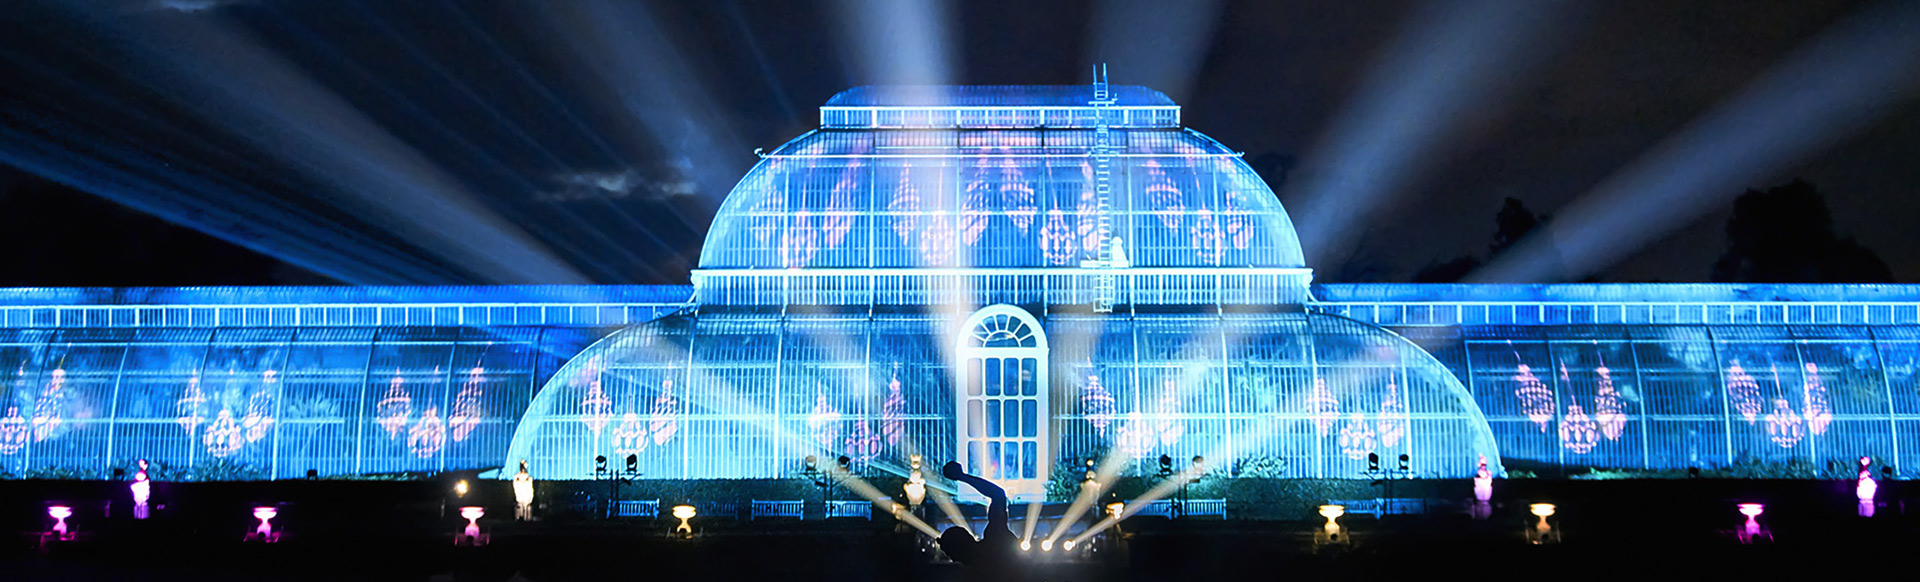 The Palm House at Kew Gardens lit up in blue and purple at night